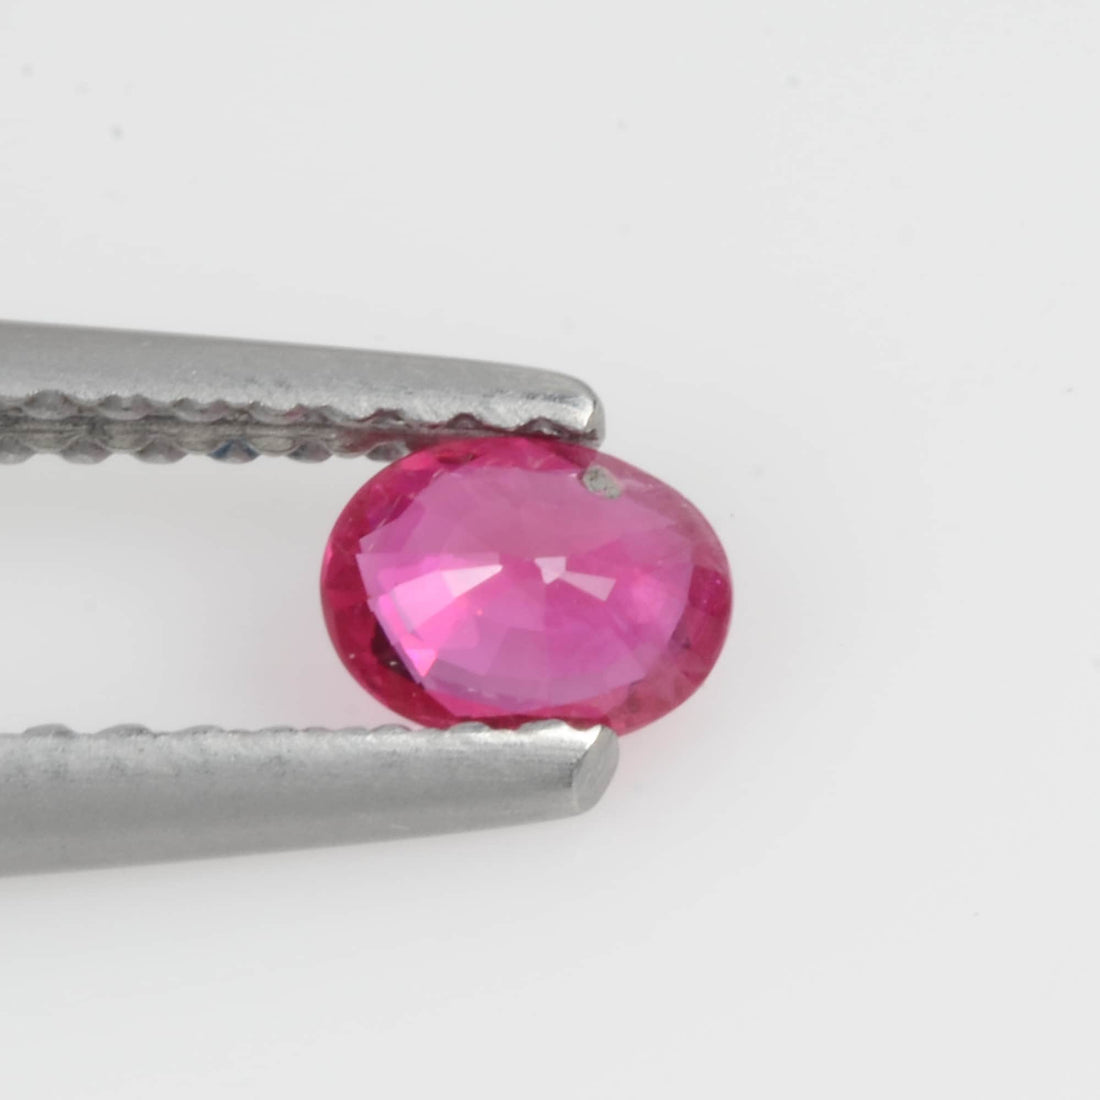 0.28 Cts Natural Ruby Loose Gemstone Oval Cut